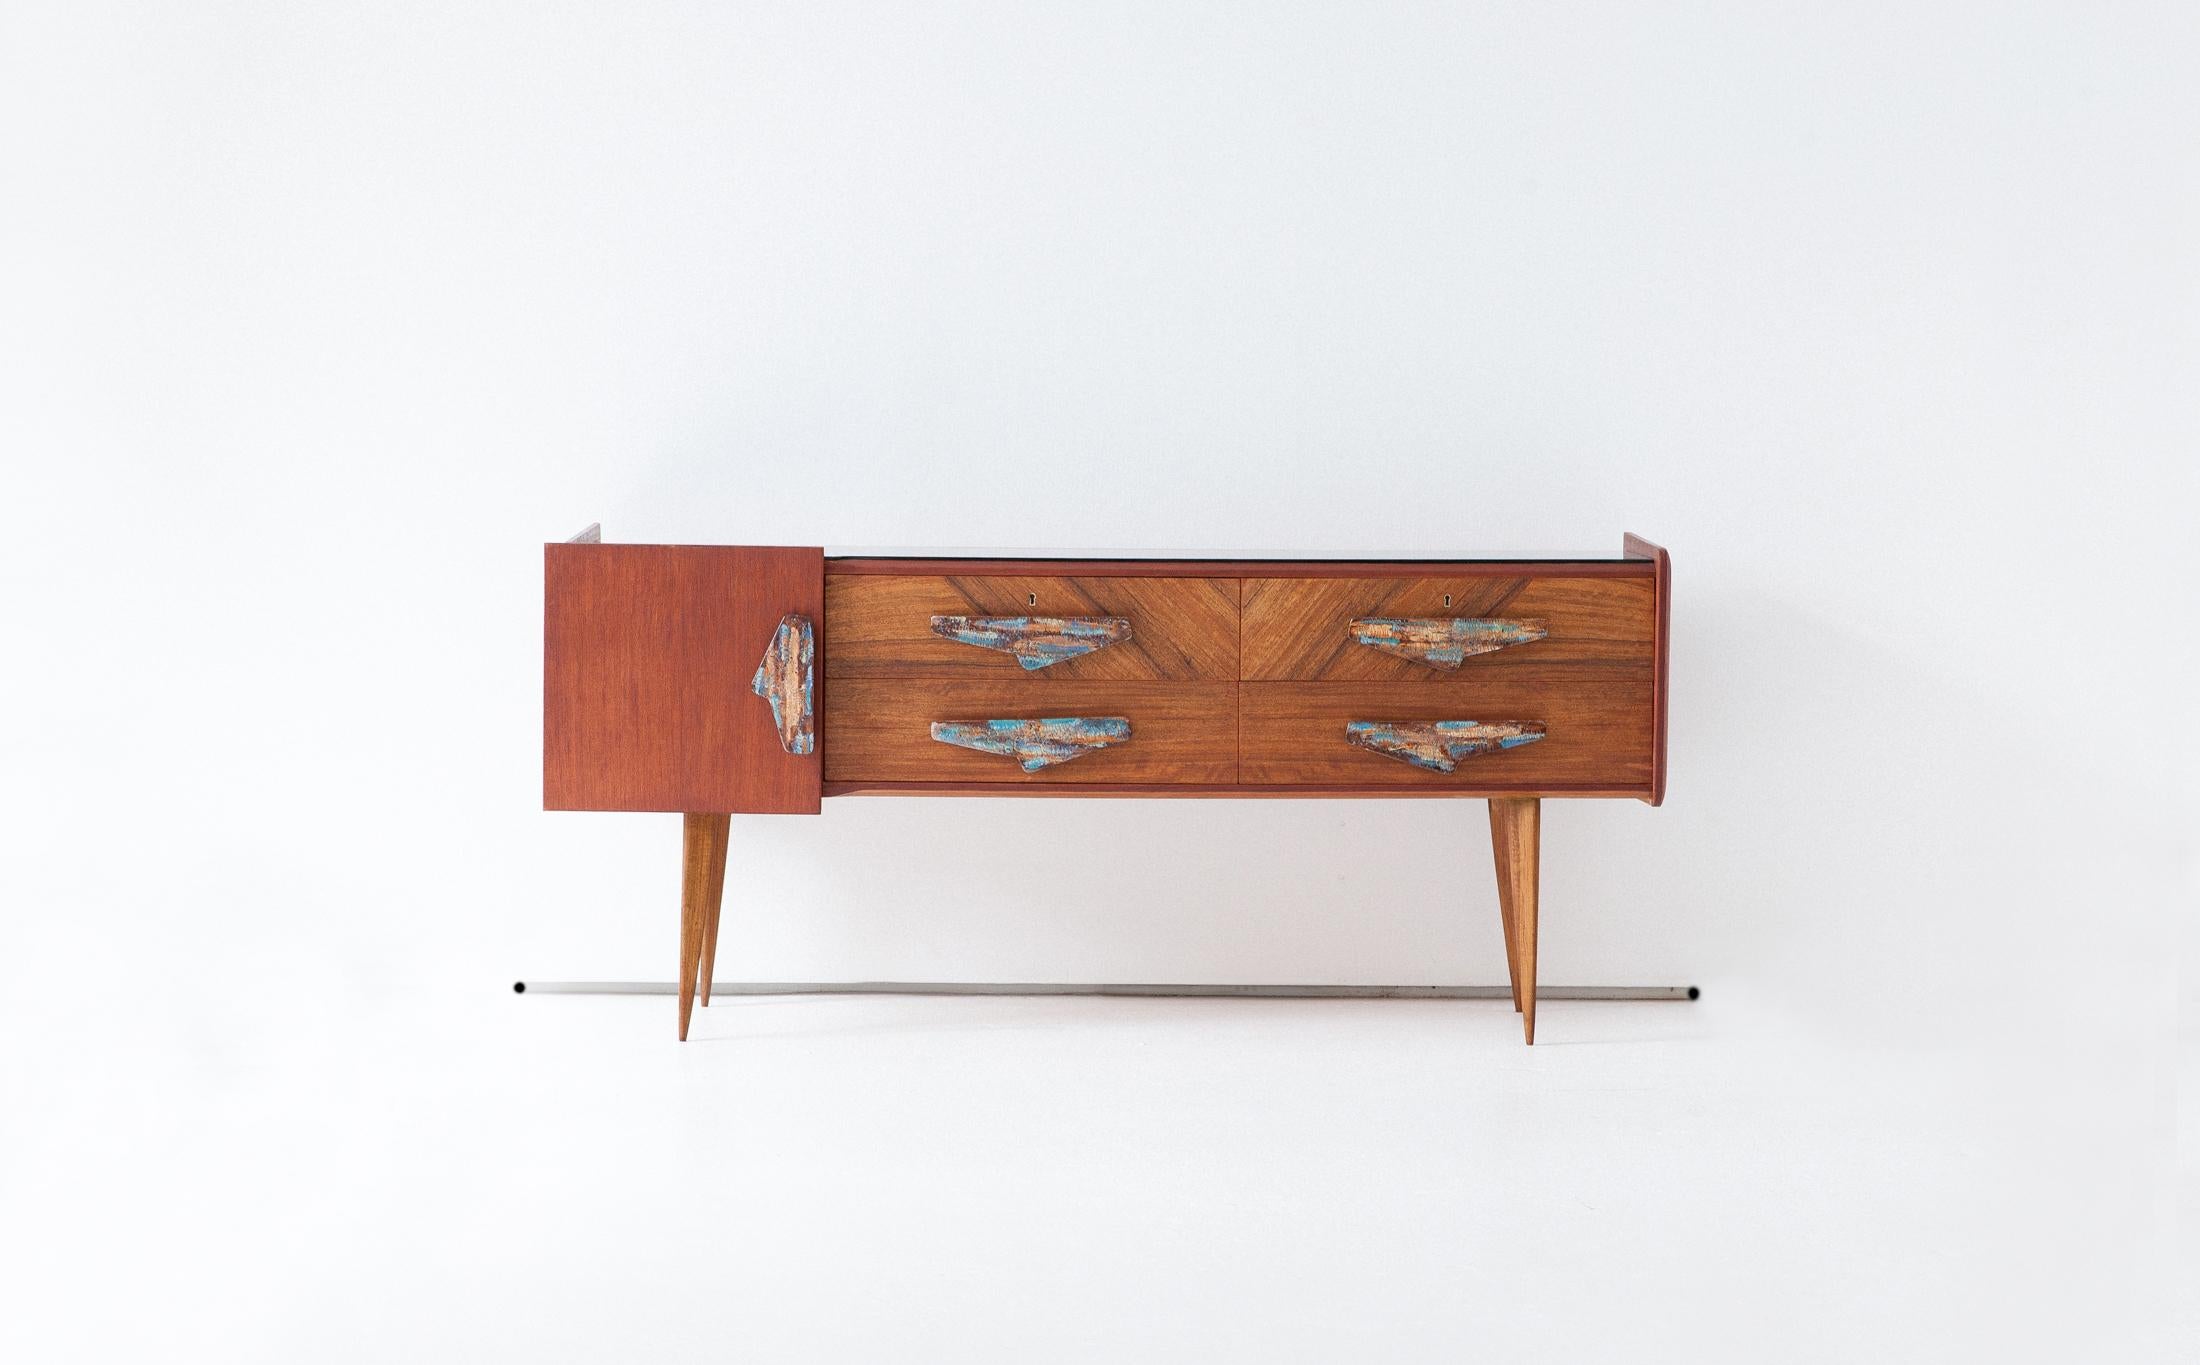 Rare Mid-Century Modern sidebaord with chest of drawers, Italy, 1950s.

An incredible collection of modern and light lines combined with handmade decoration typical of the most unique Italian design furniture of the 1950s.

We have dedicated